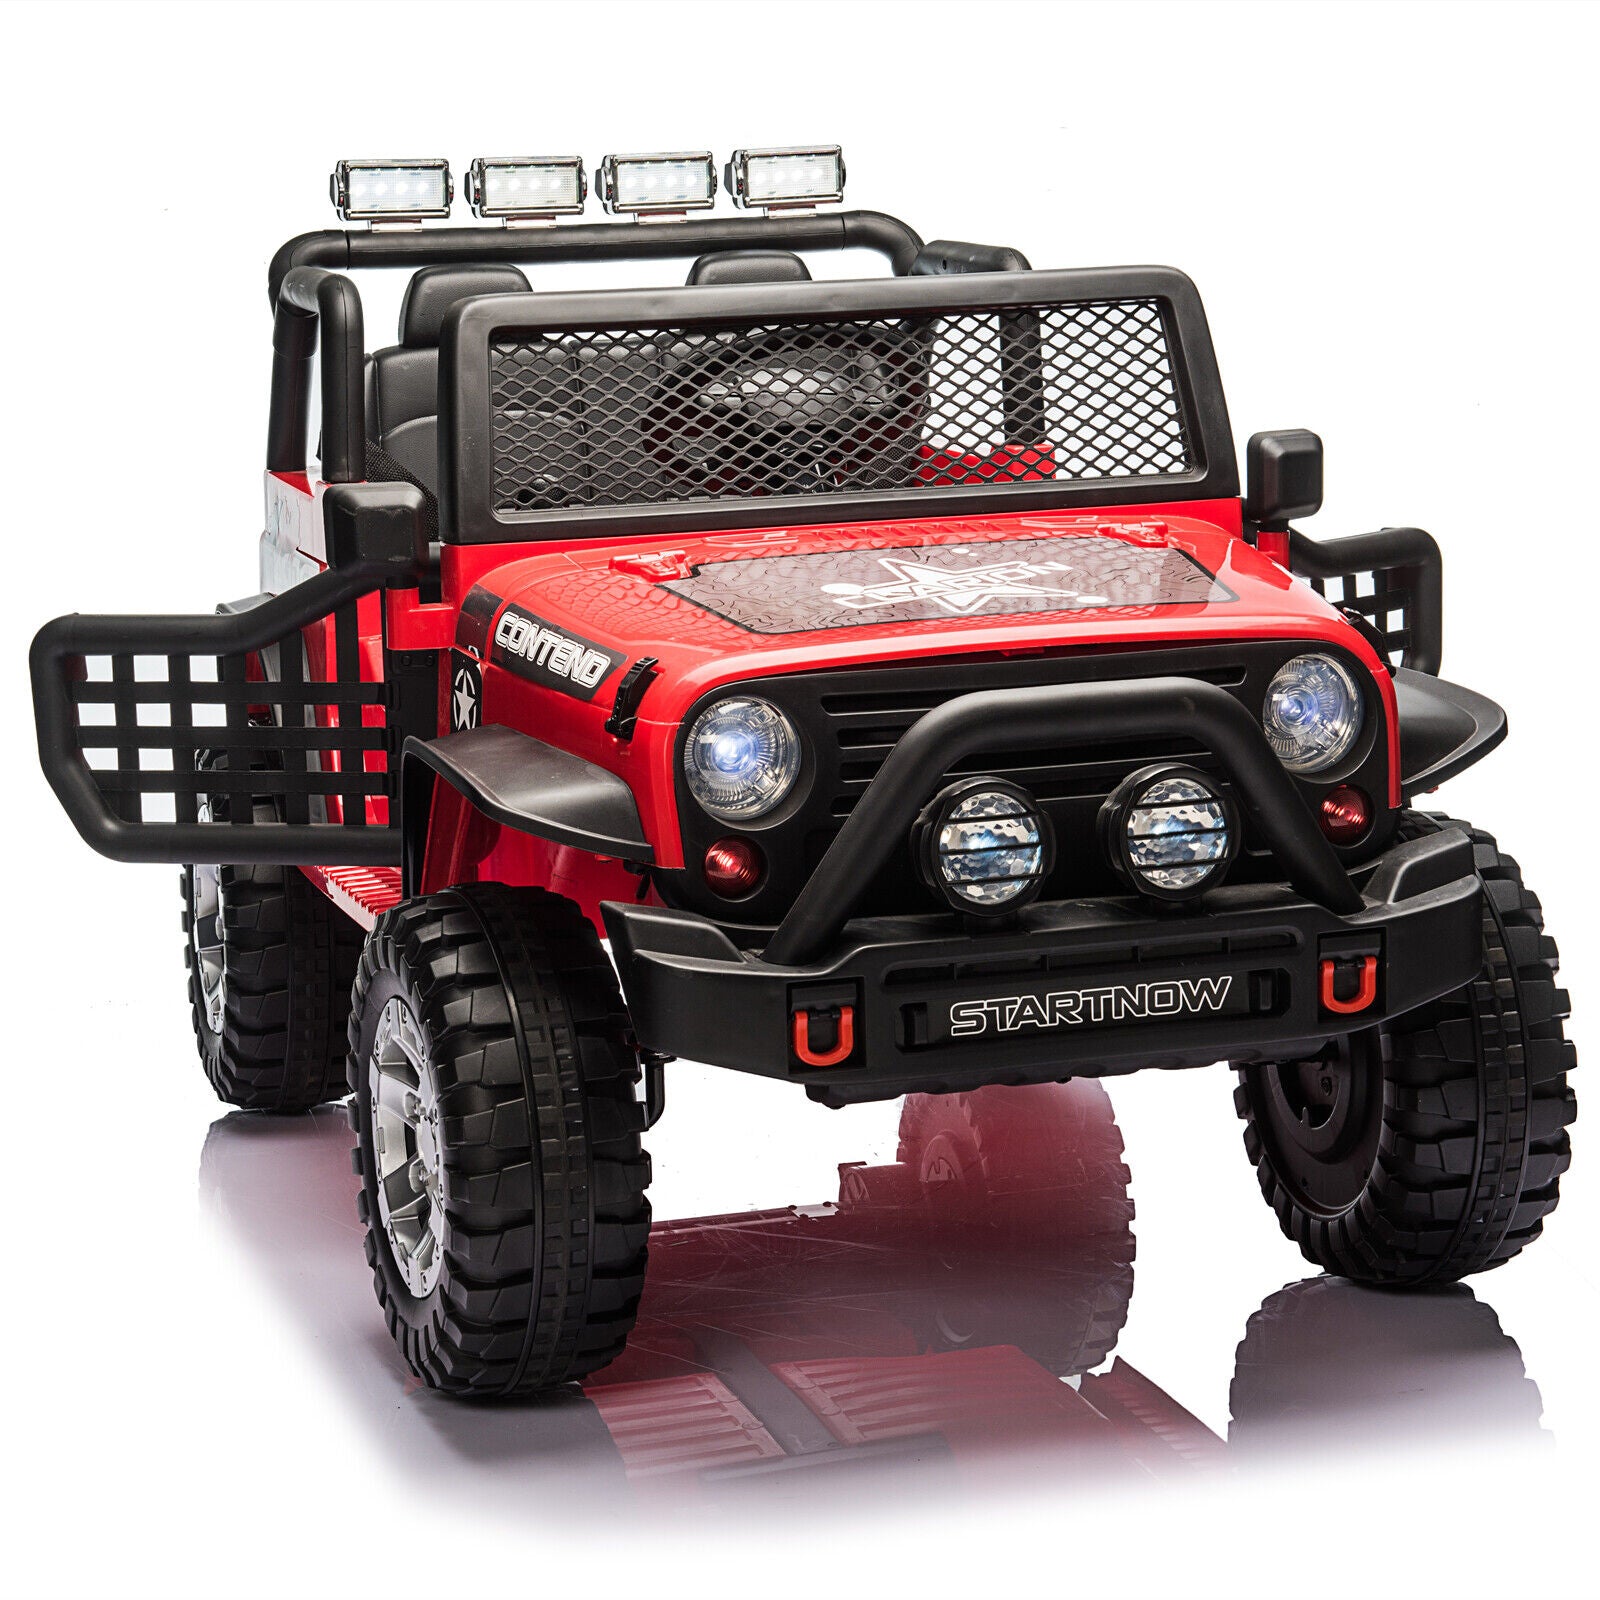 12V Electric Kids Ride On Car 2- Seat SUV Truck w/ Remote Control/ Spring Suspension/ LED Lights/ Bluetooth/ MP3